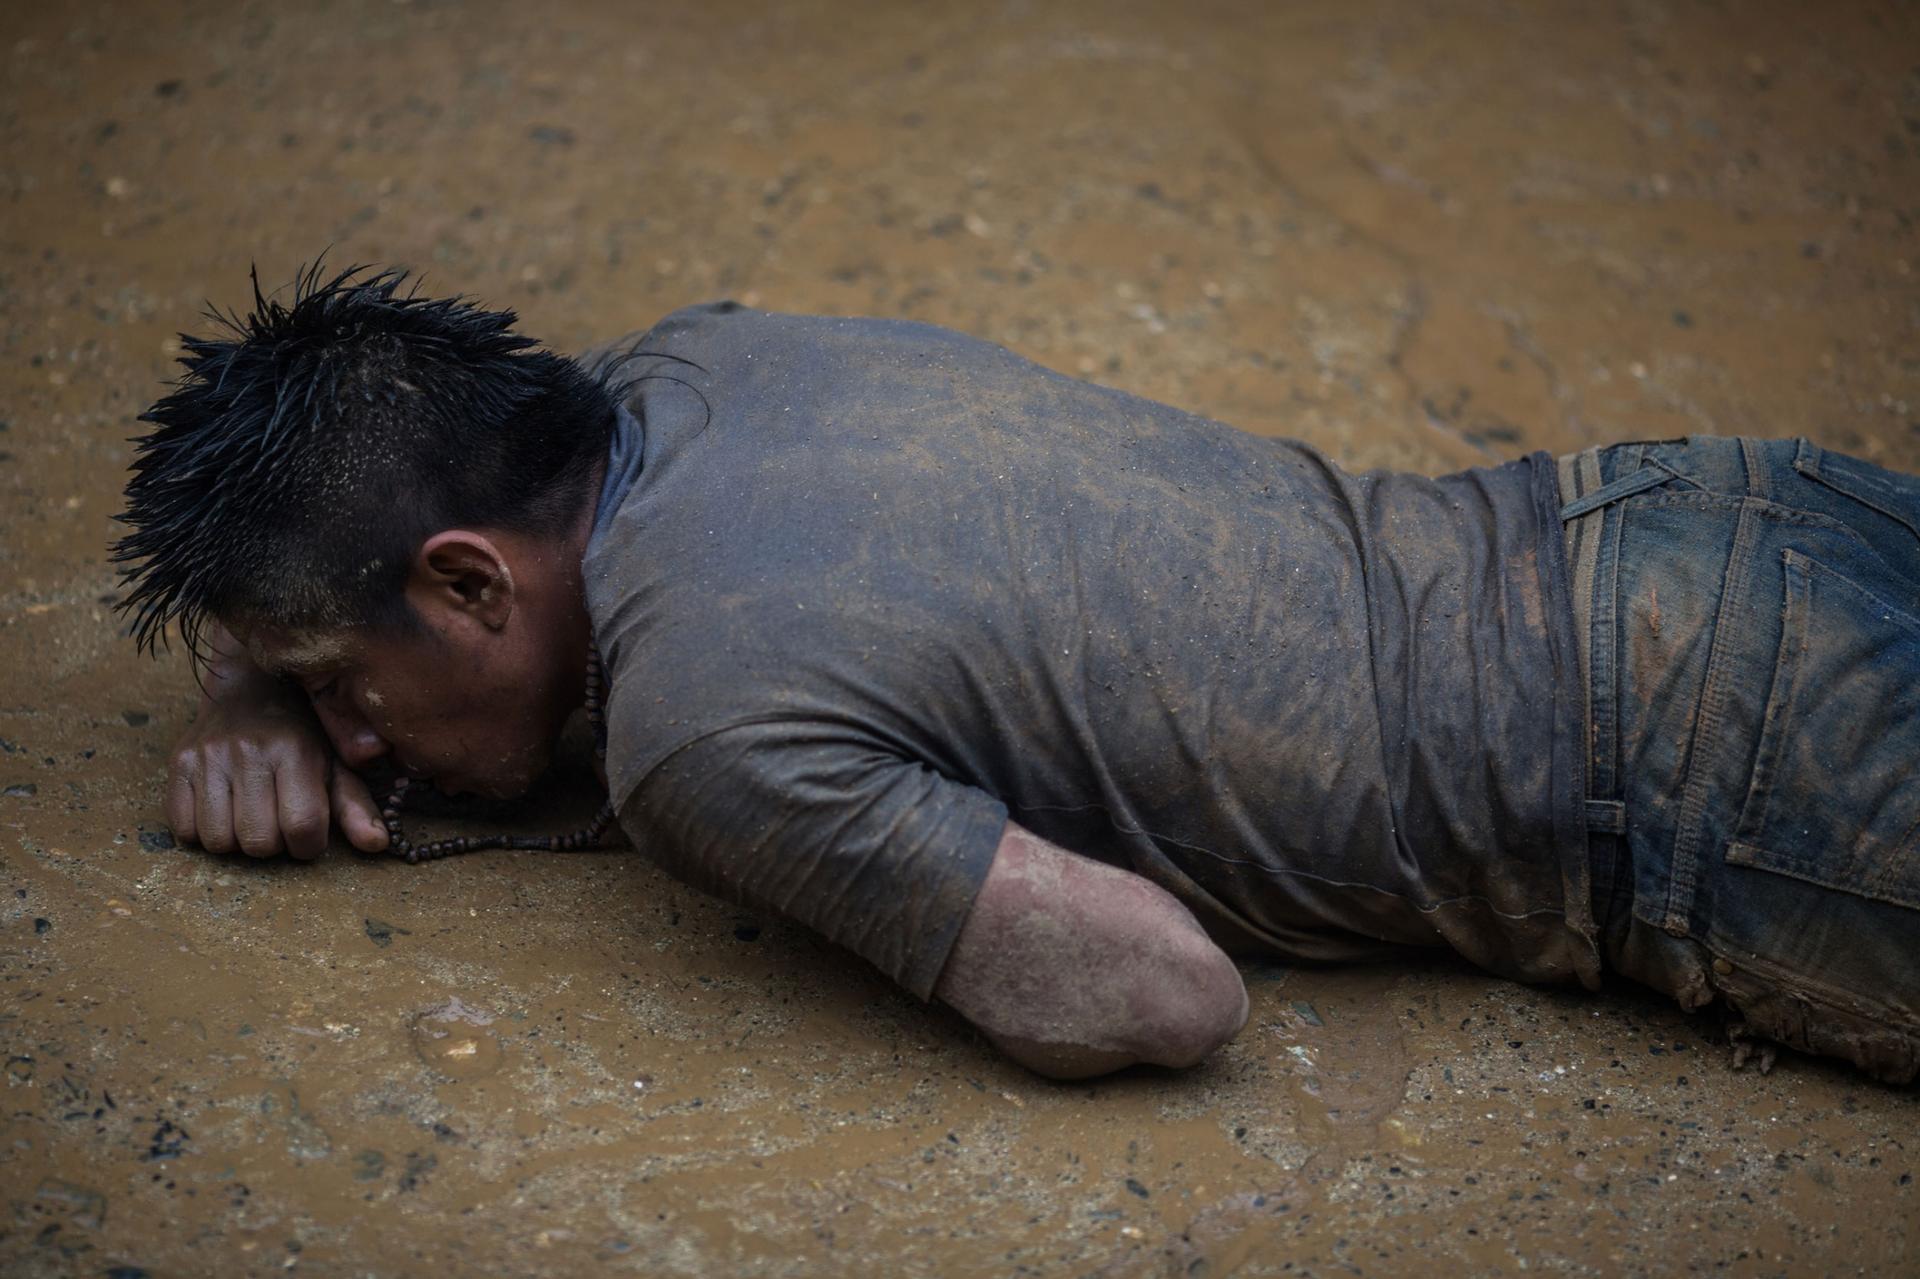 A man is shown crawling on his stomach in the mud and covered in dirt.